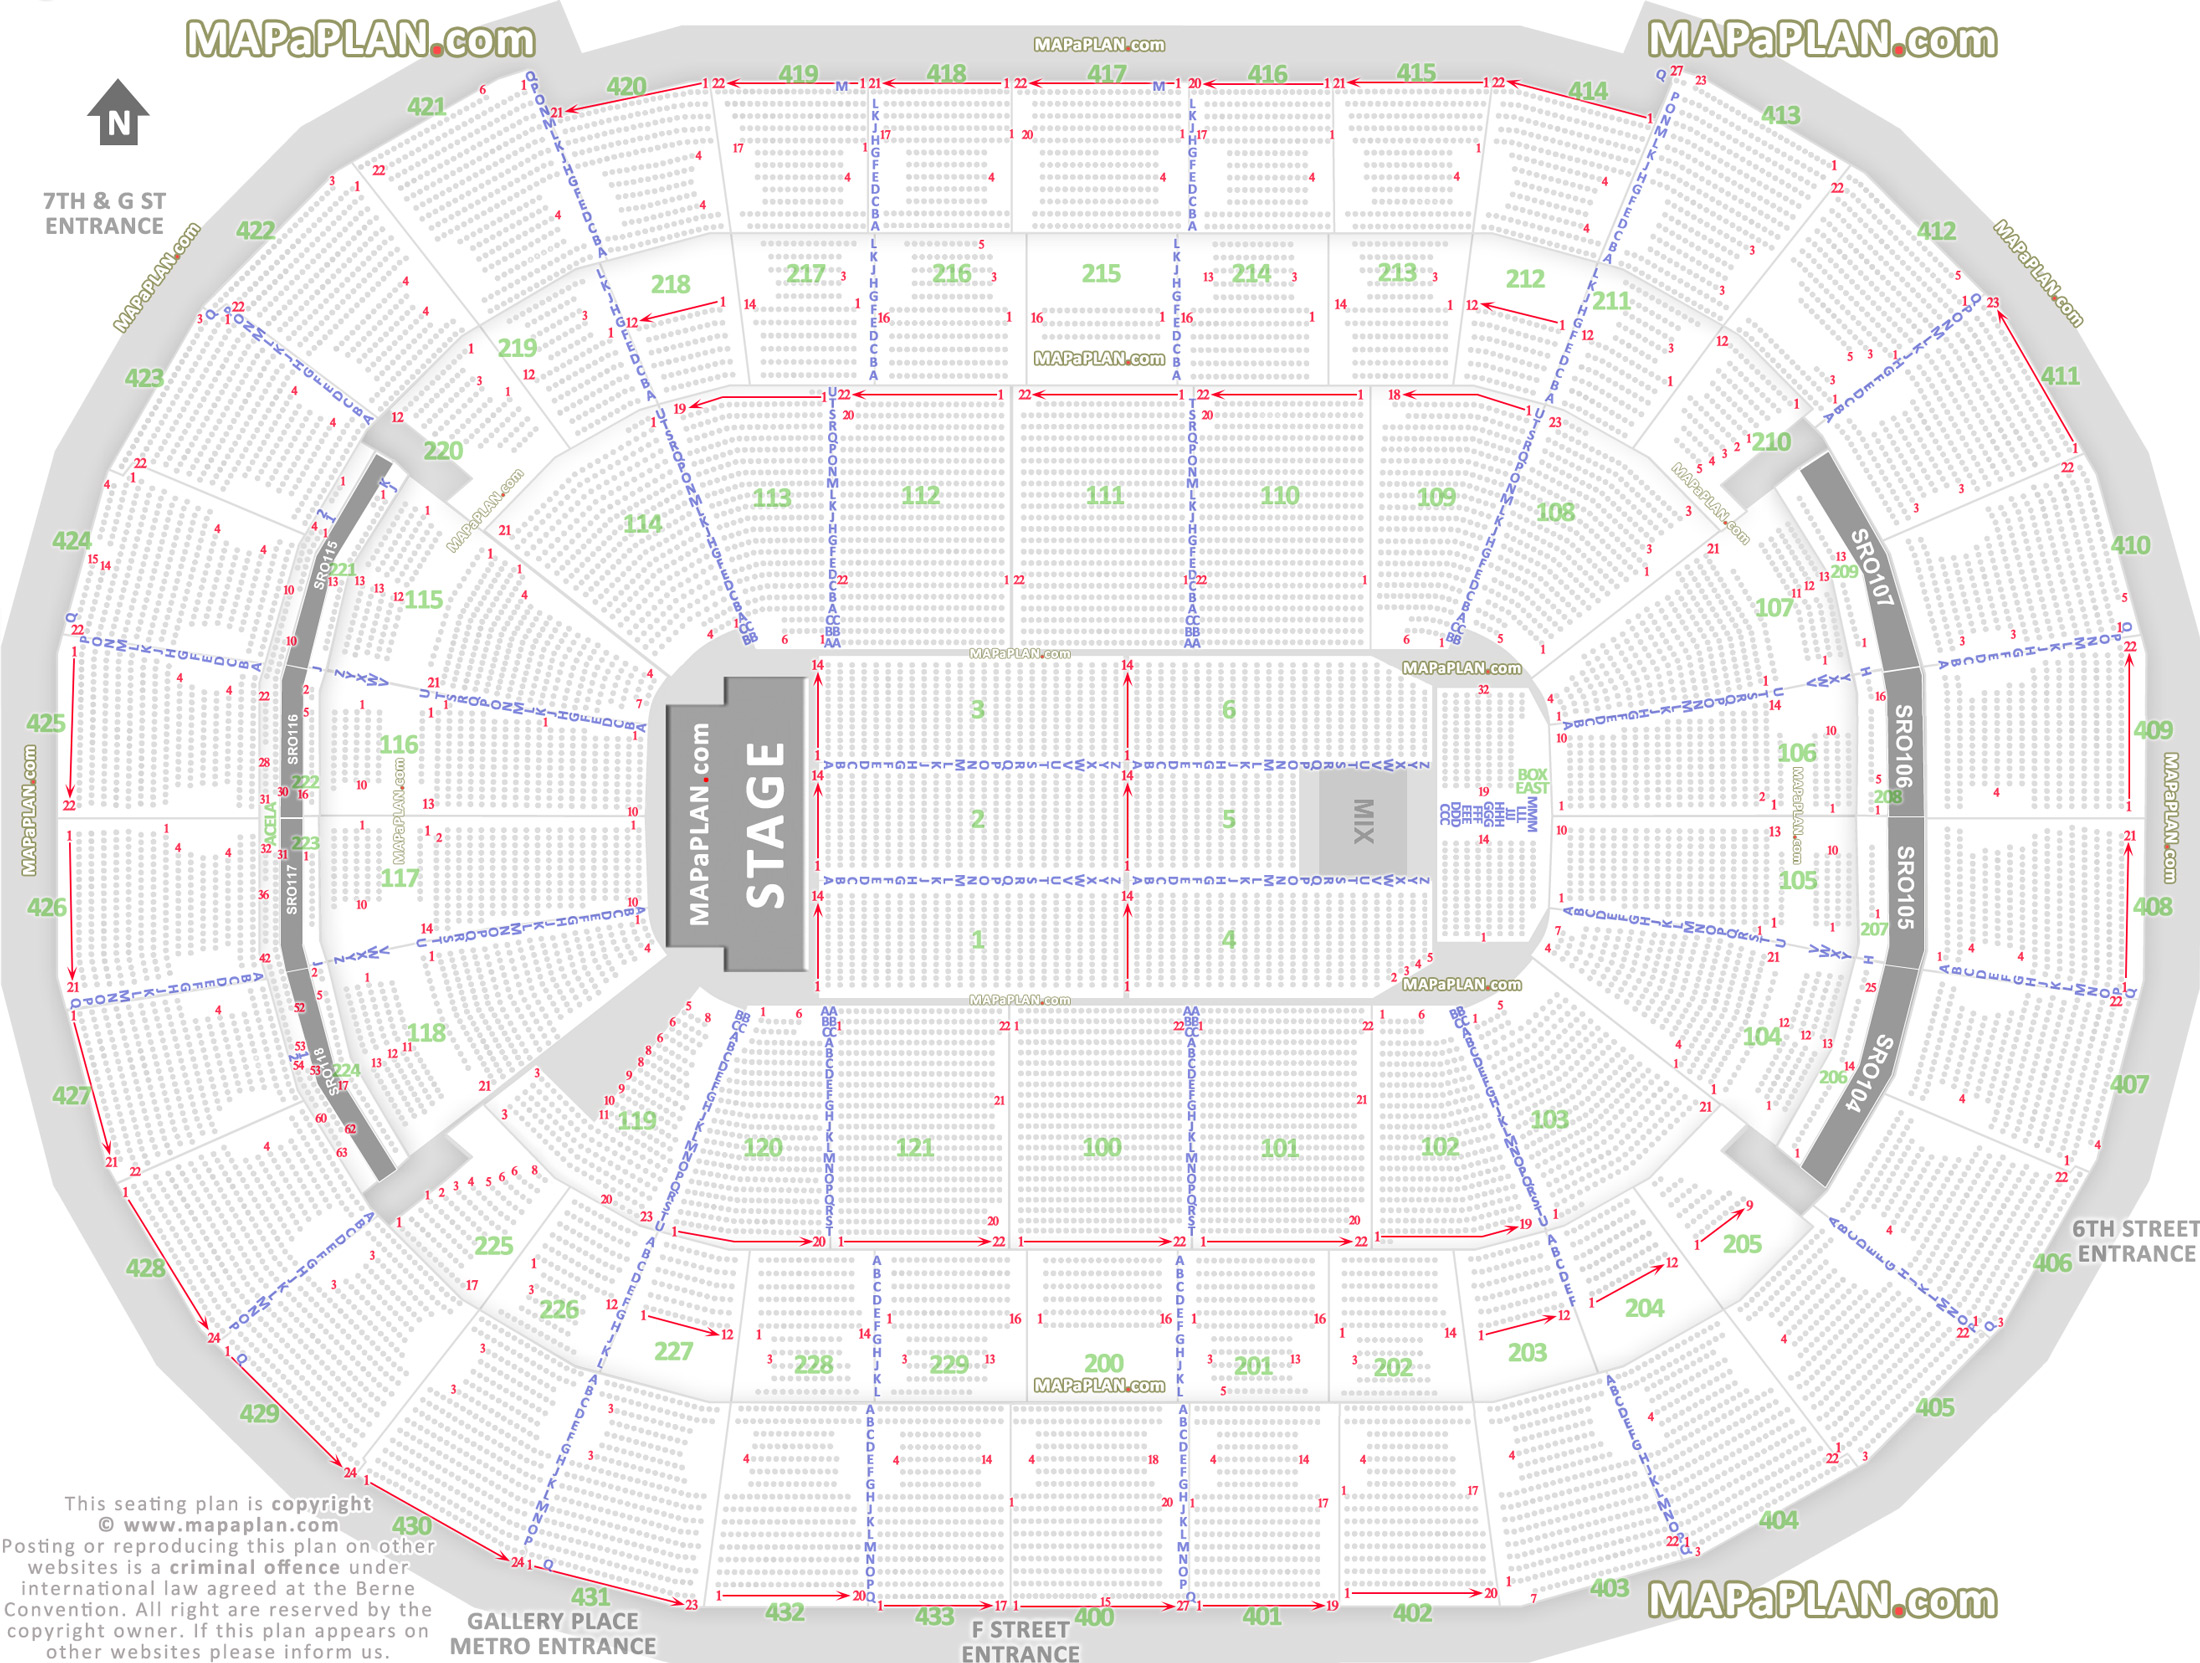 detailed seat row numbers end stage full concert sections floor plan arena main concourse club upper level layout Washington DC Capital One Arena Center seating chart